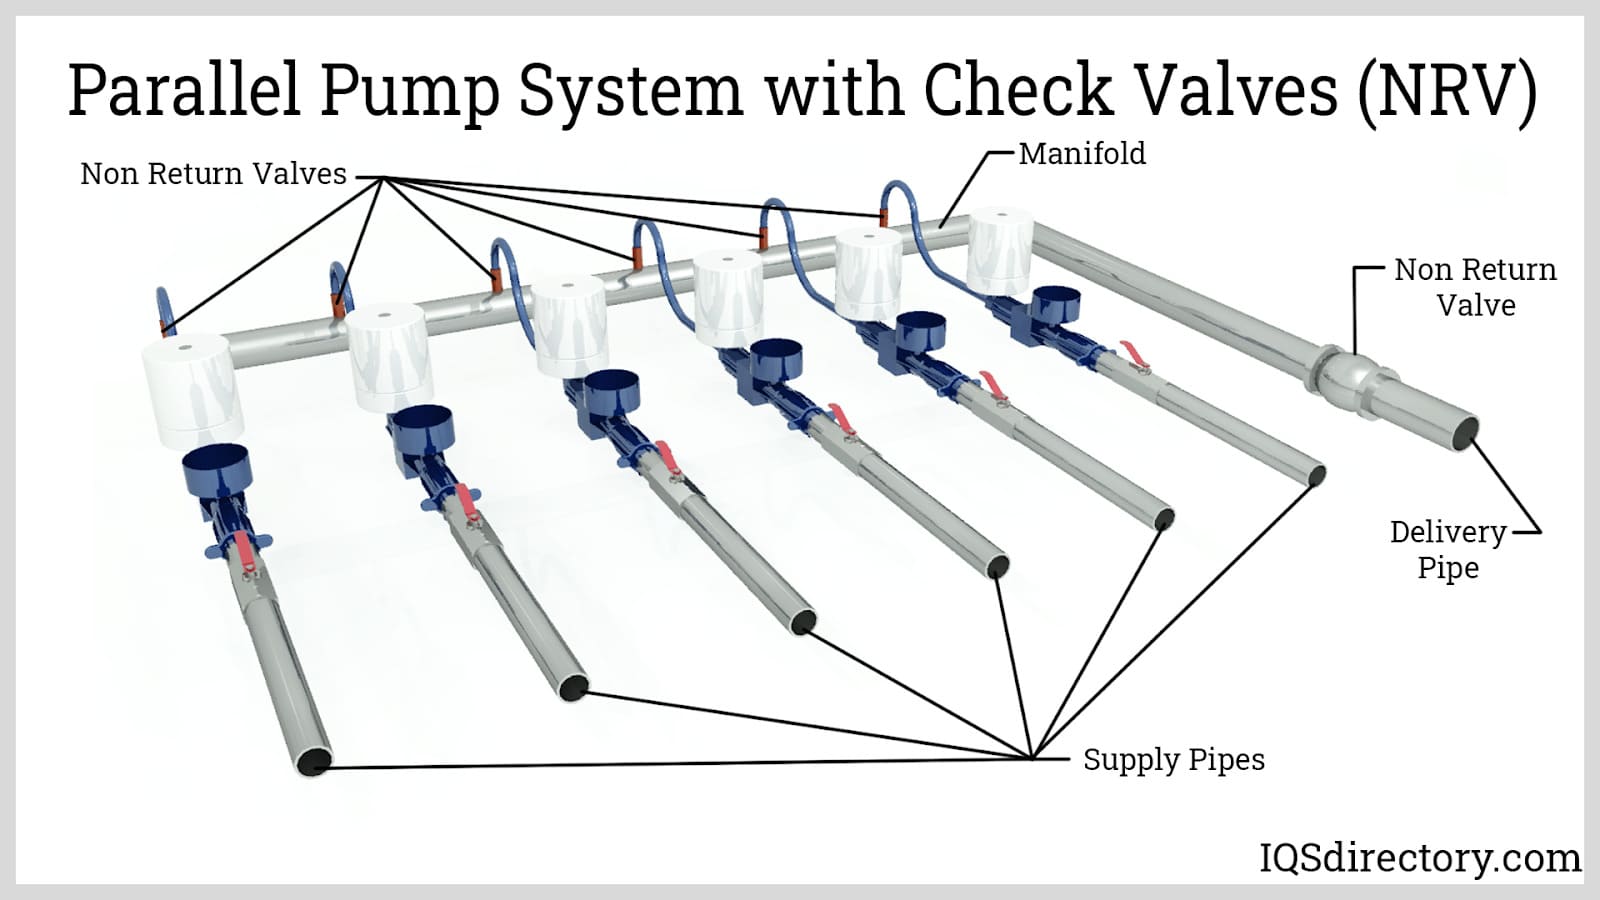 Parallel Pump System with Check Valves (NRV)